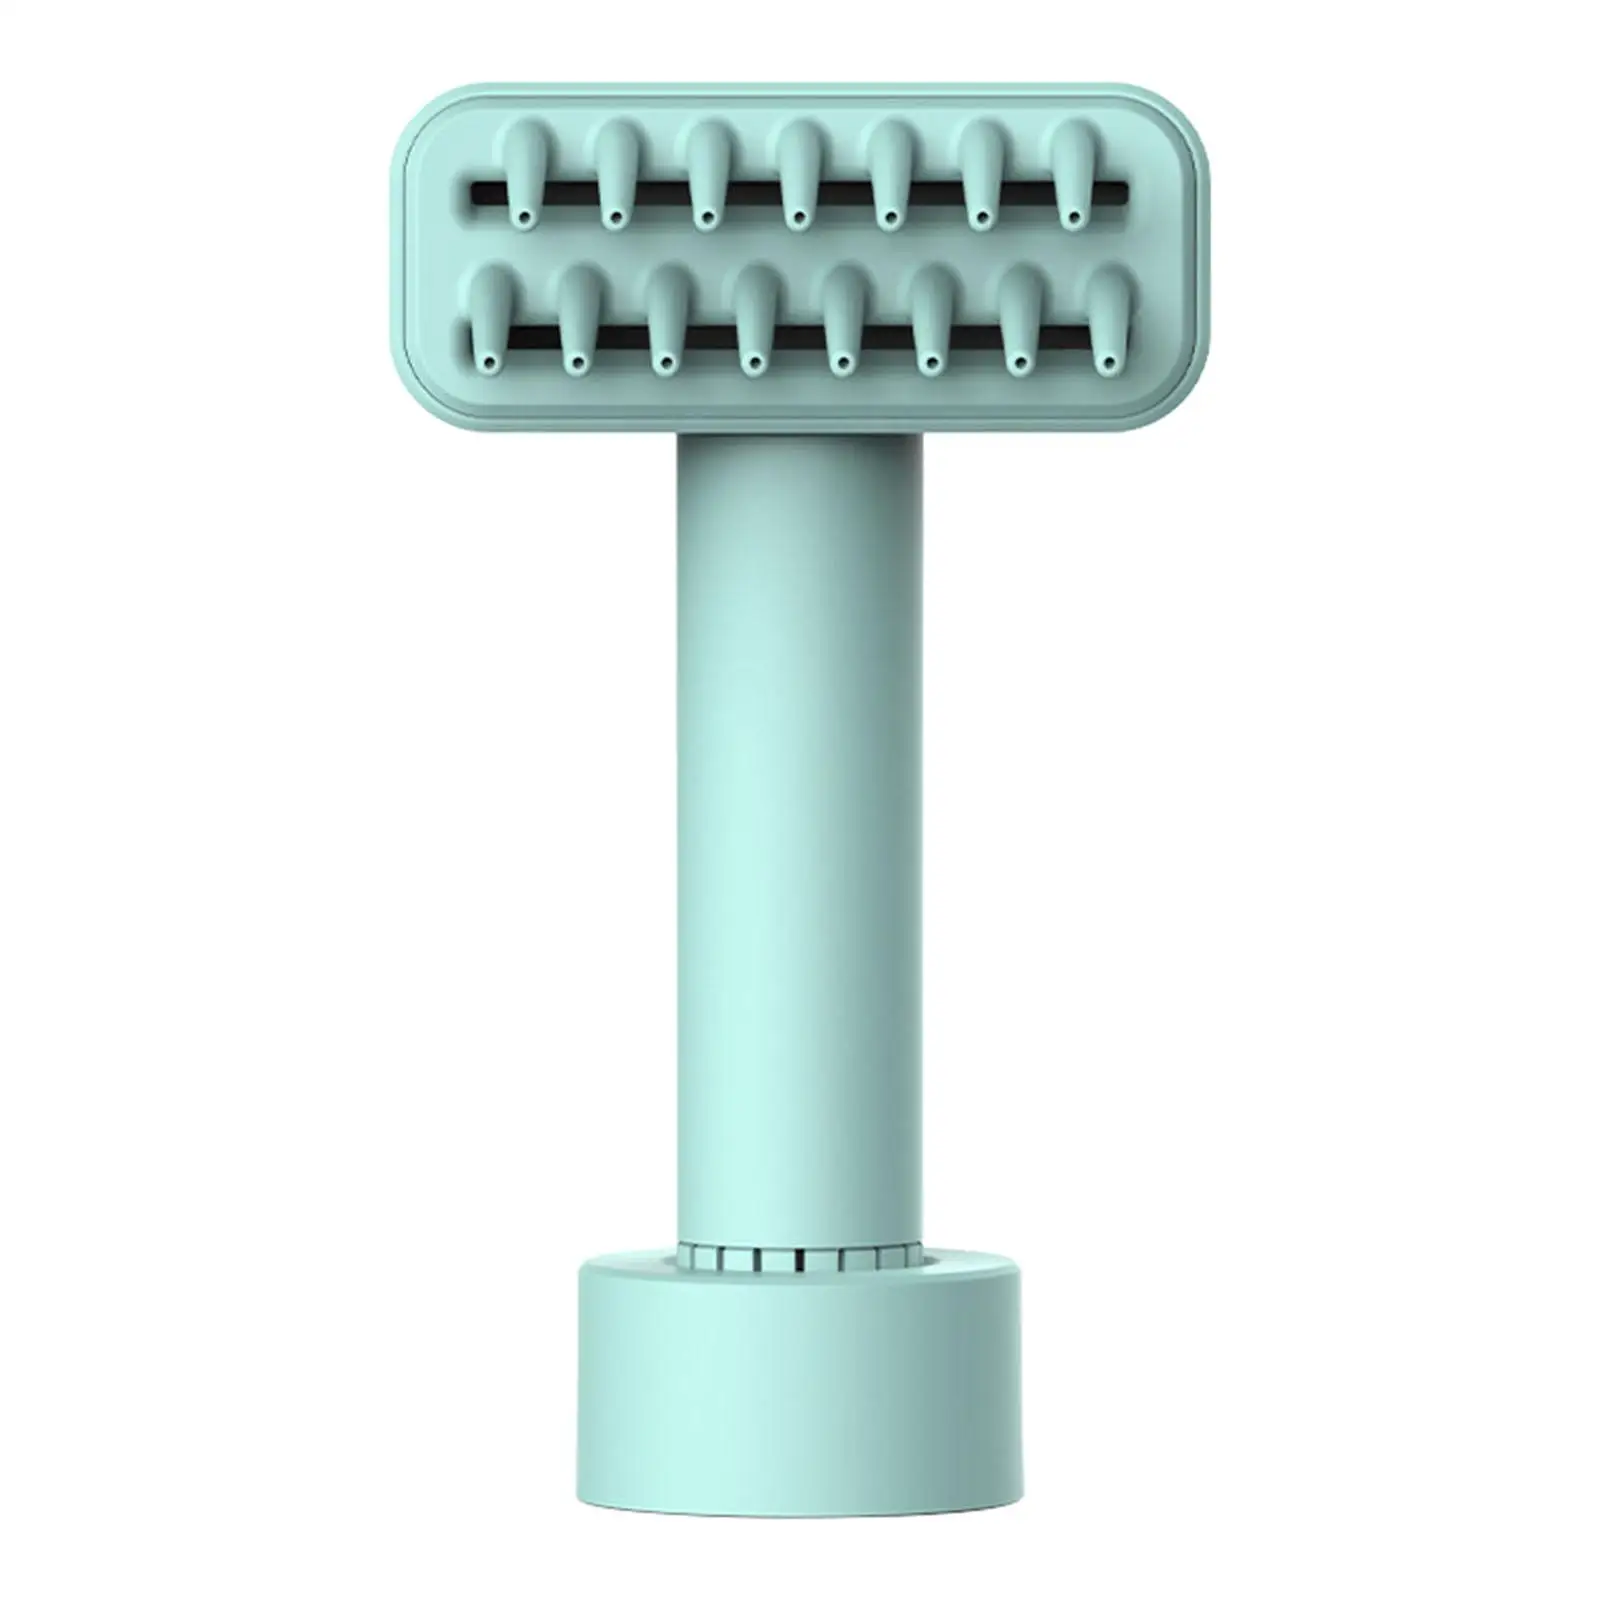 Dog Grooming Comb Cat Brush Hair Grooming Pet Supplies Hair Trimmer USB Electric Pet Hair Remover Sucker for Puppy Kitten